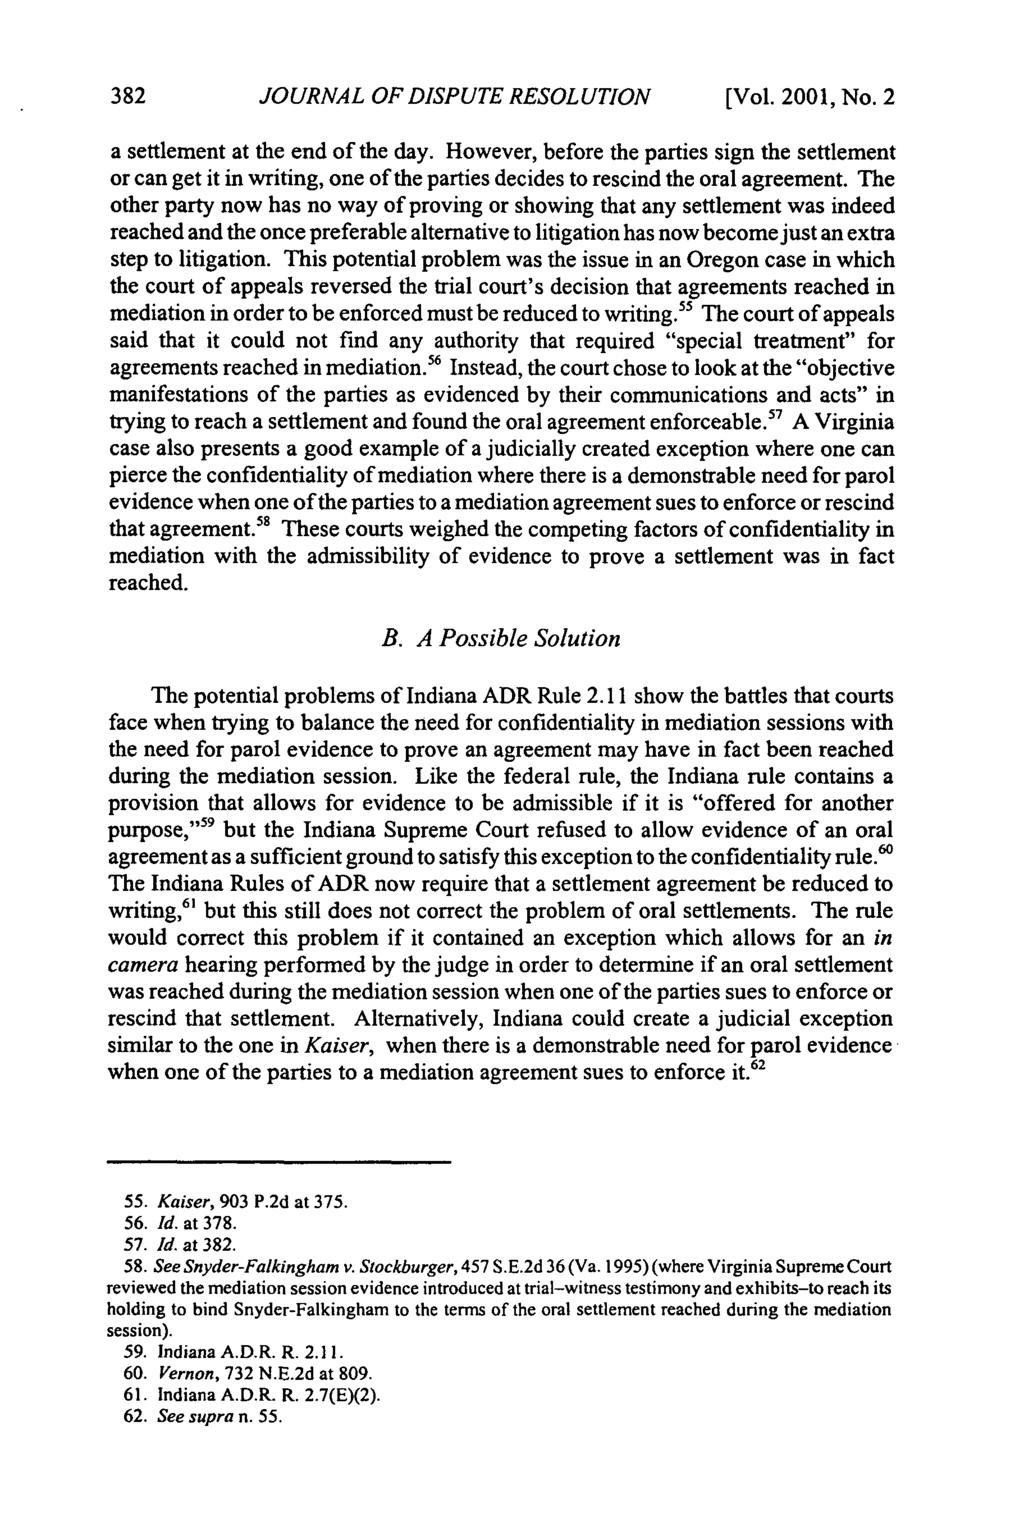 Journal of Dispute Resolution, Vol. 2001, Iss. 2 [2001], Art. 8 JOURNAL OF DISPUTE RESOLUTION a settlement at the end of the day.